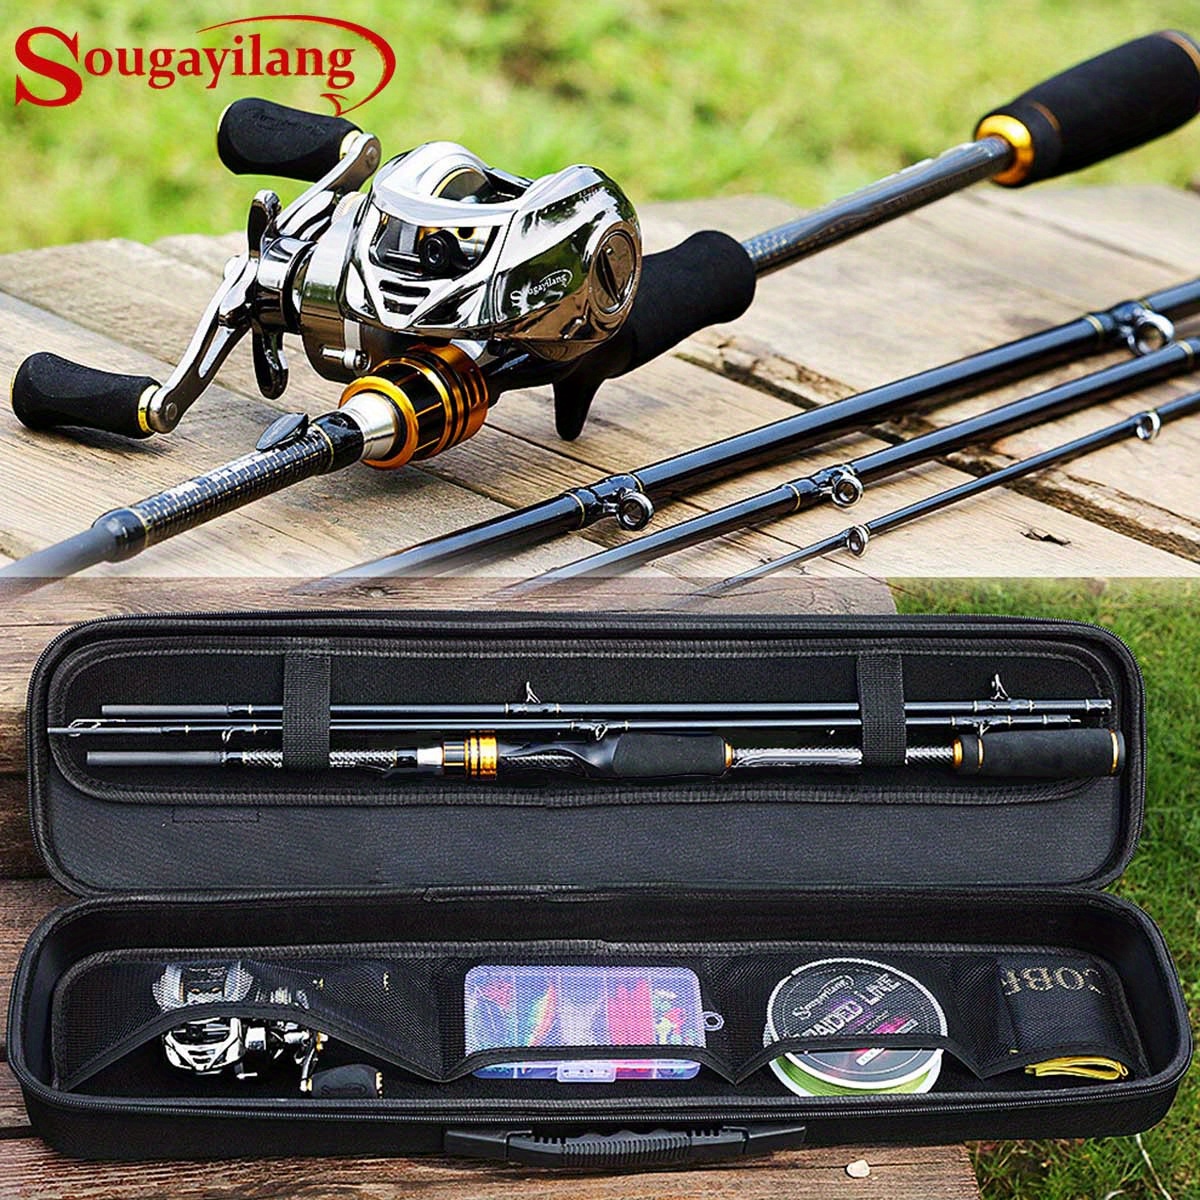 Fishing Rod Reel Combo 24 Ton Carbon Fiber 4 Piece Casting Rod and Baitcasting  Reel Freshwater Saltwater Lure Bass Fishing Sets